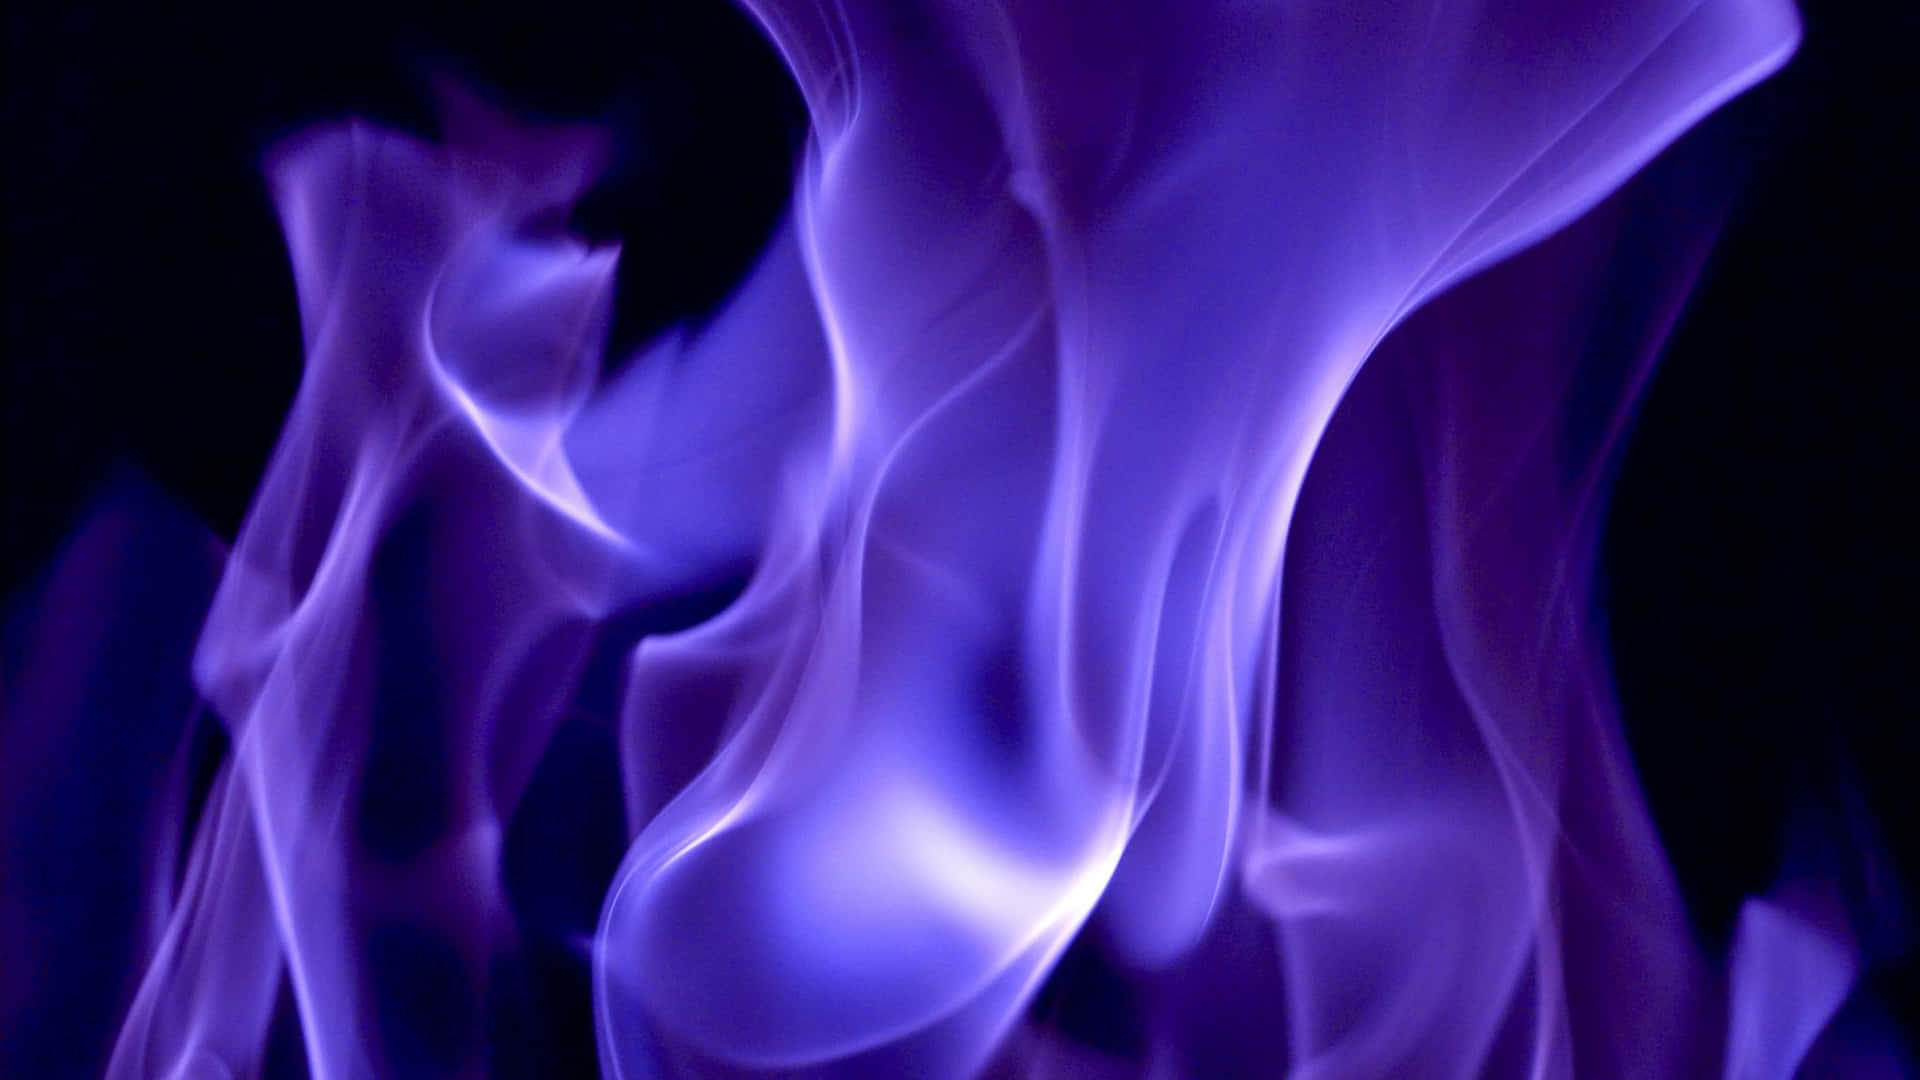 "Experience the warmth and beauty of purple fire"